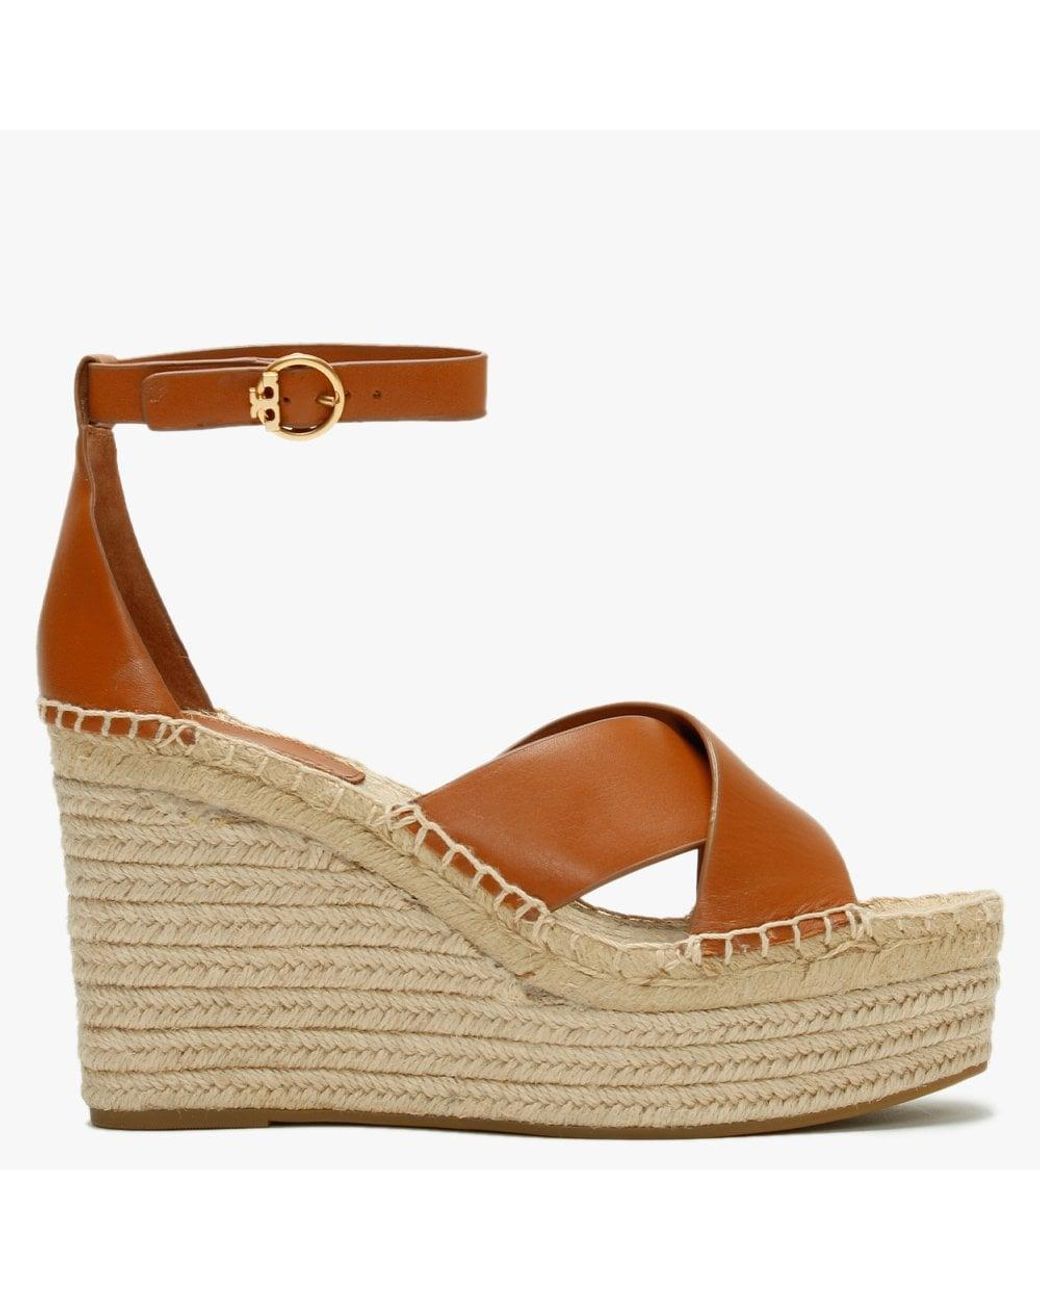 Tory Burch Selby Ambra Leather Wedge Espadrille Sandals in Brown | Lyst  Australia